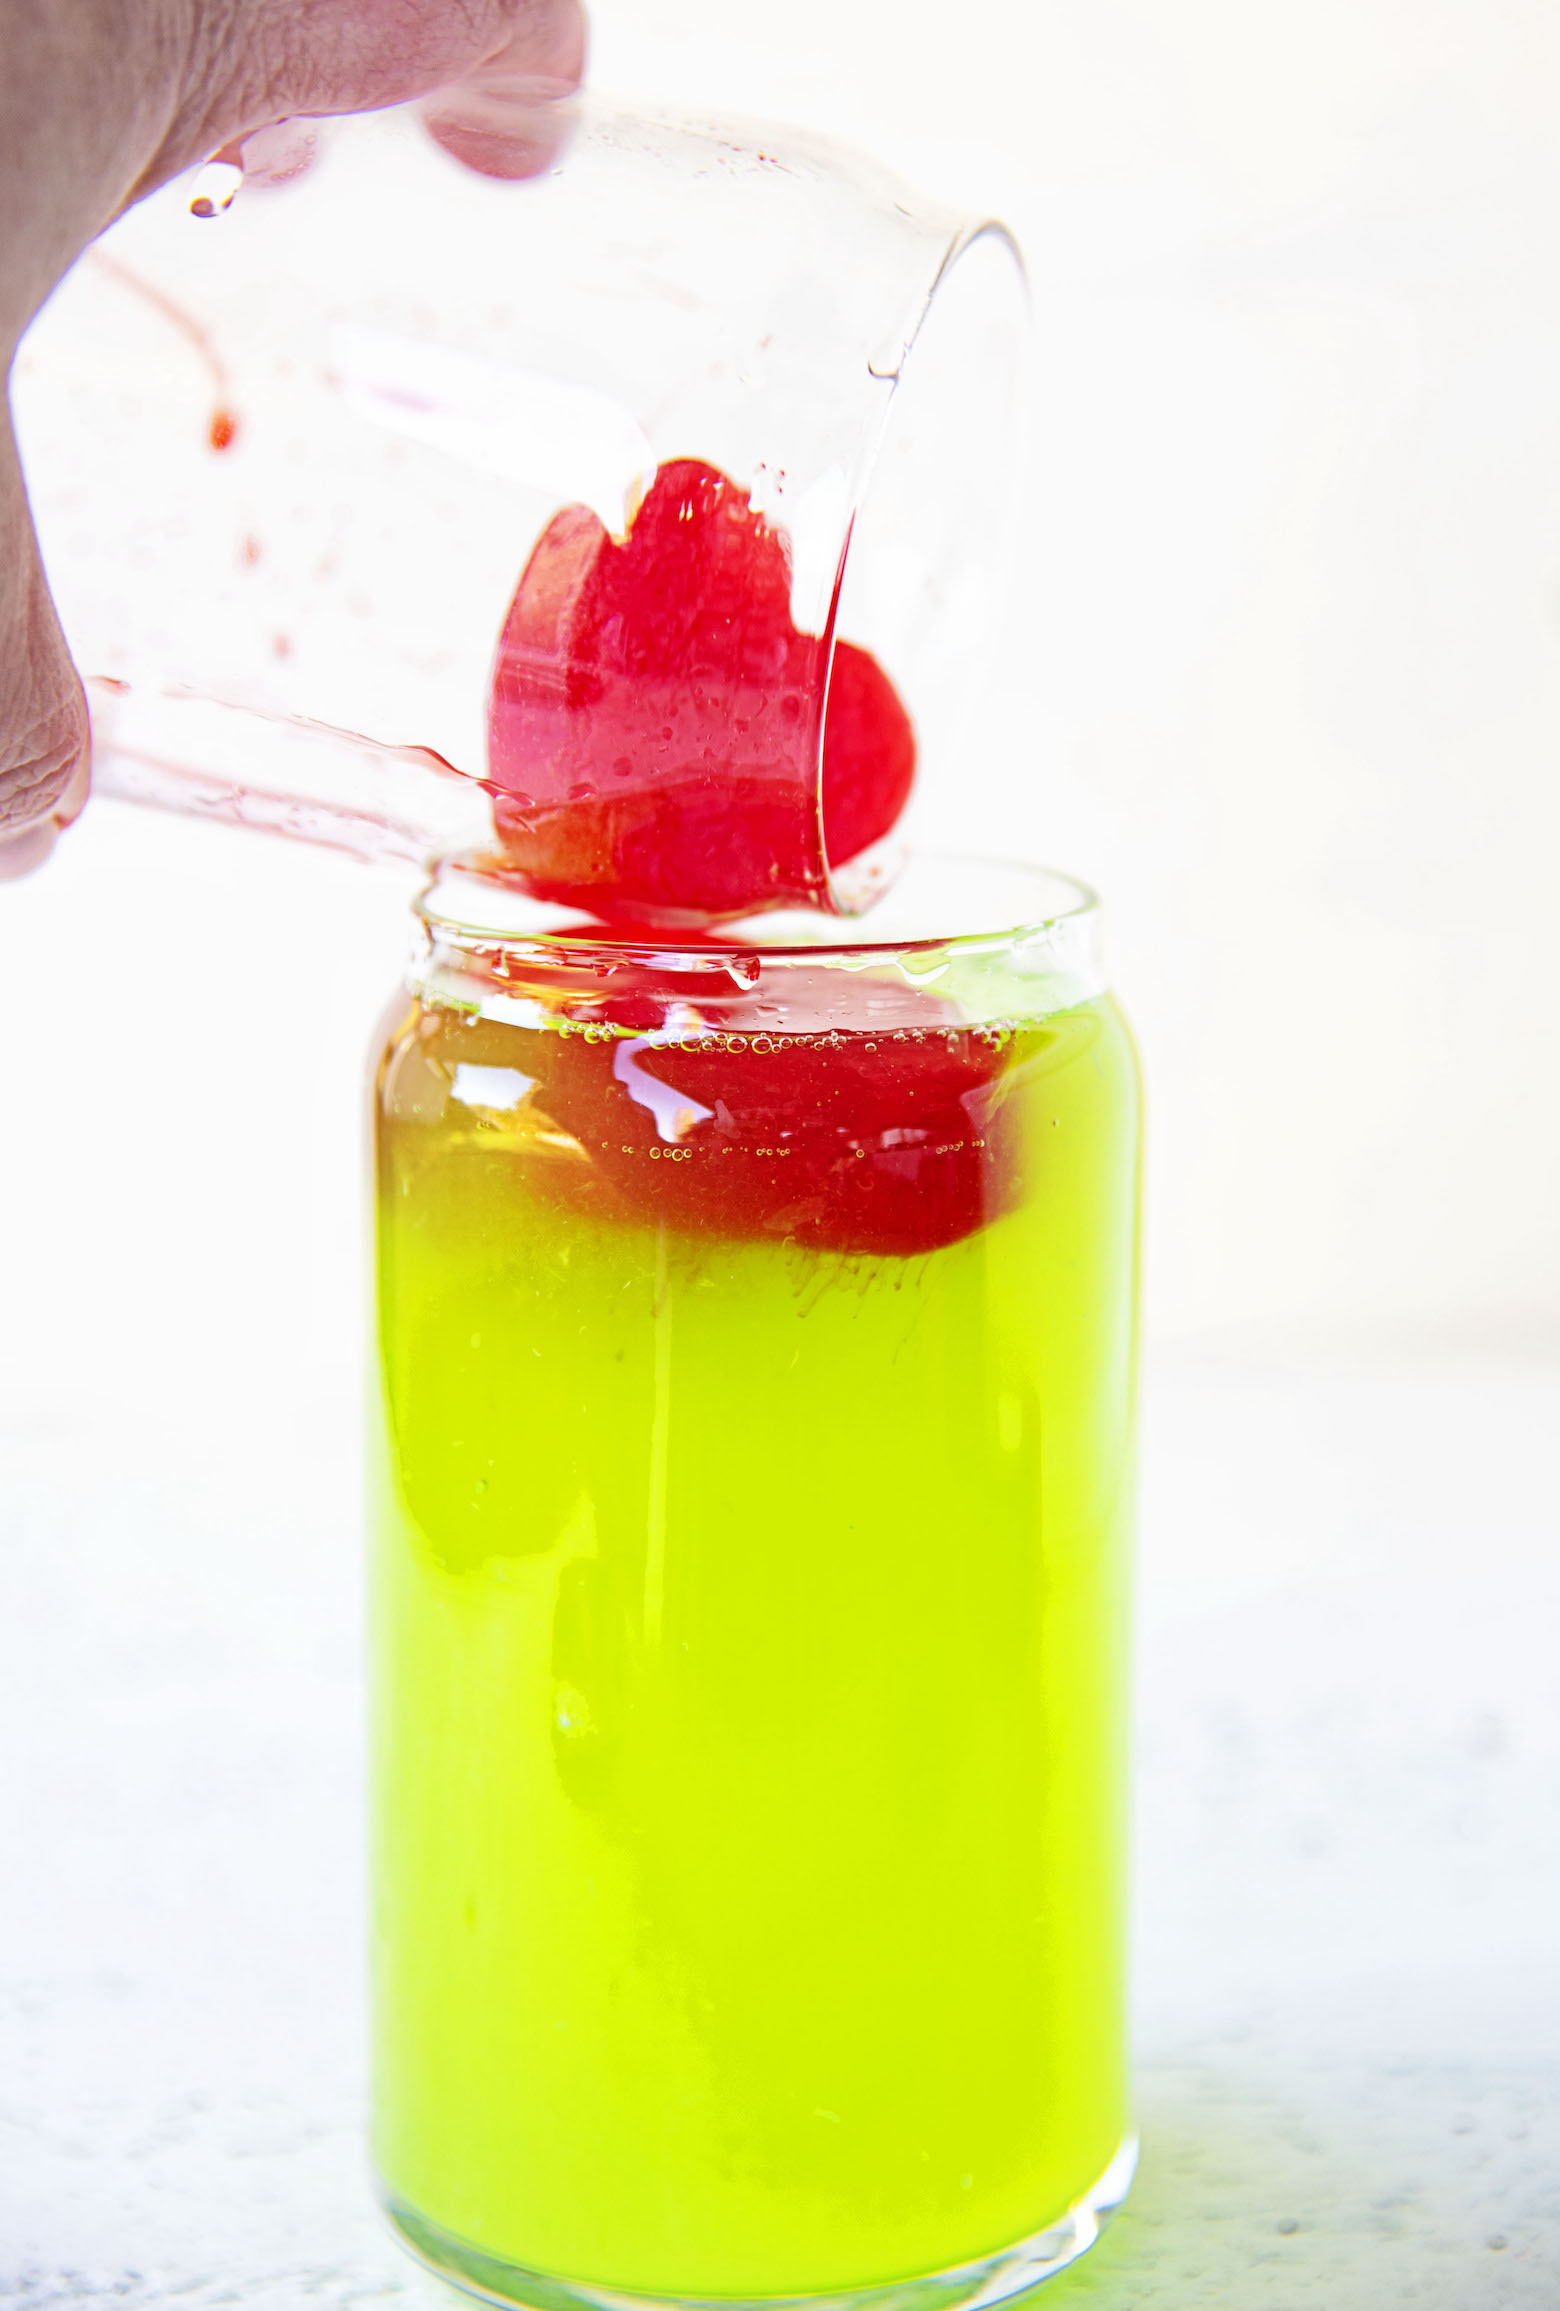 The Grinch Spiked Green Lemonade